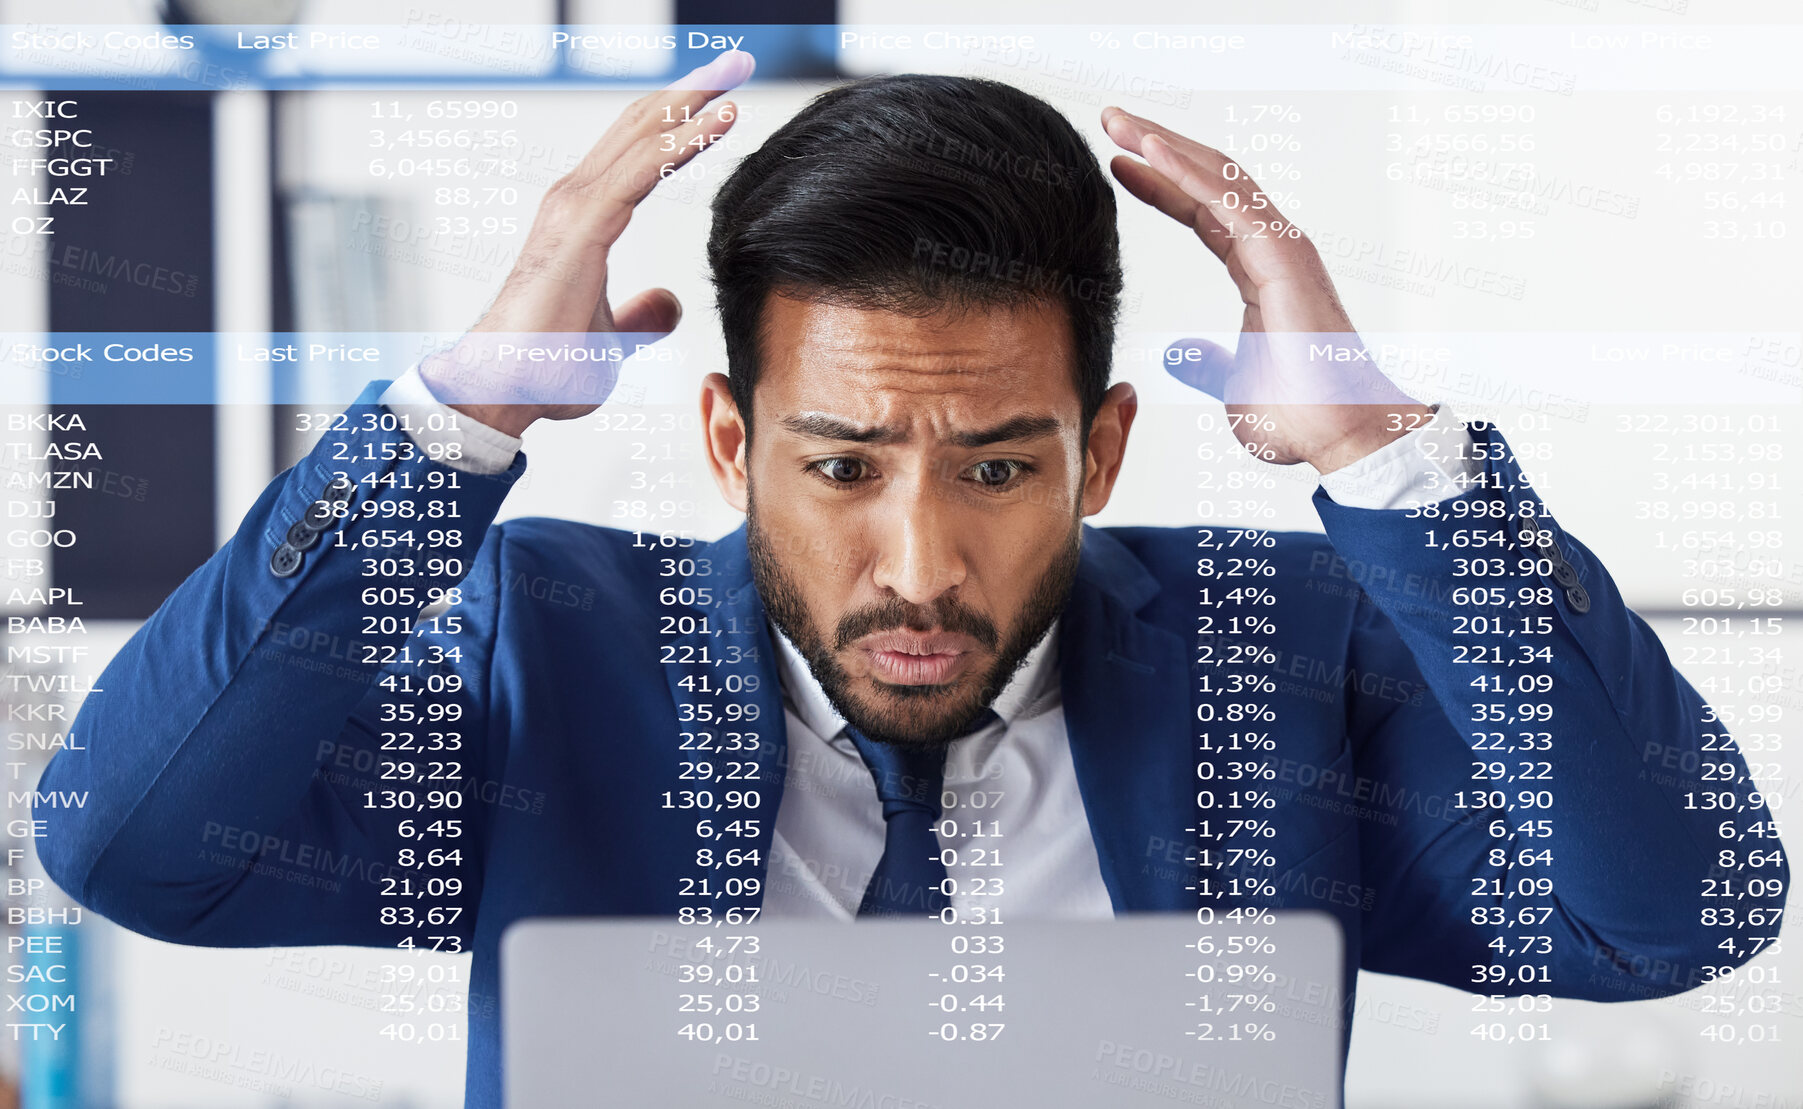 Buy stock photo Data, laptop and business man stress over stock market crash, 404 software fail or IPO investment problem. Crypto trading overlay, financial loss data and studio person frustrated on white background